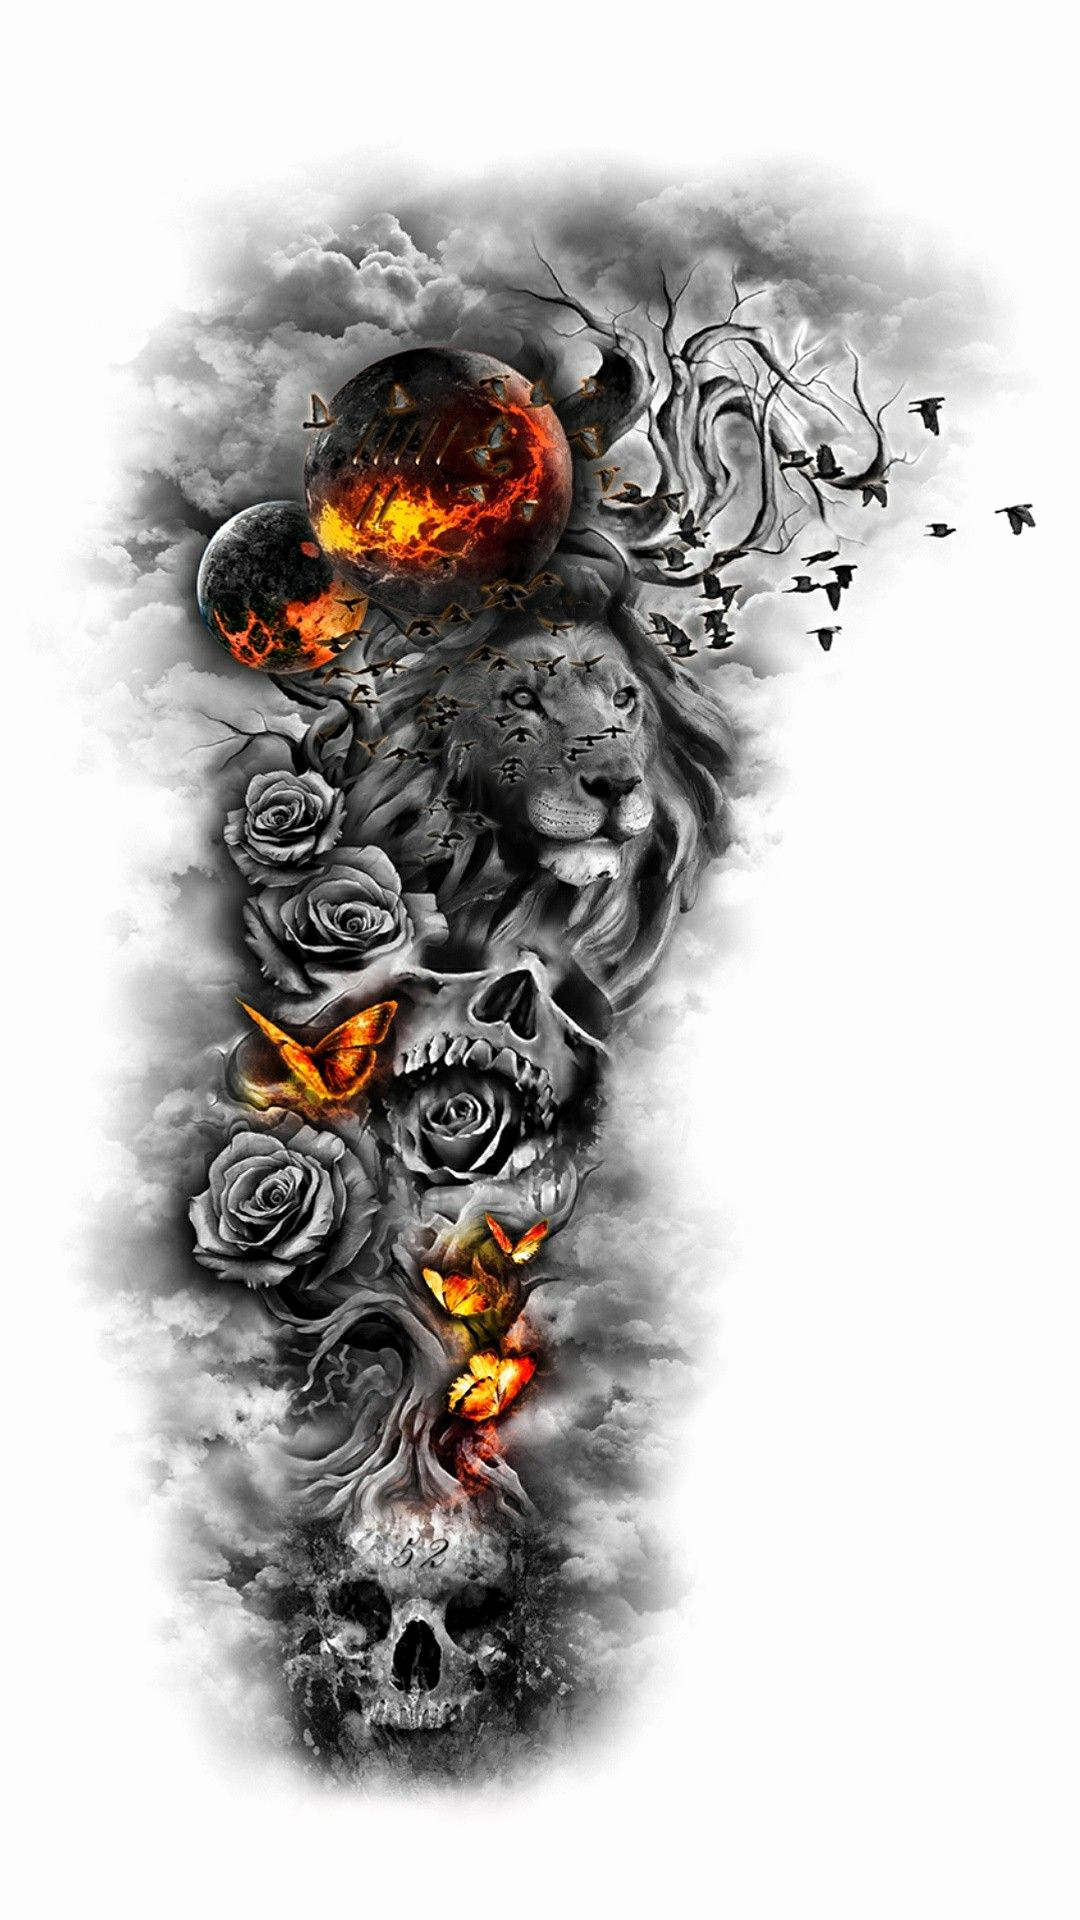 1080x1920, Skull And Roses Wallpaper New Lion Art Abstract - Lion Sleeve  Tattoo Design - 1080x1920 Wallpaper 